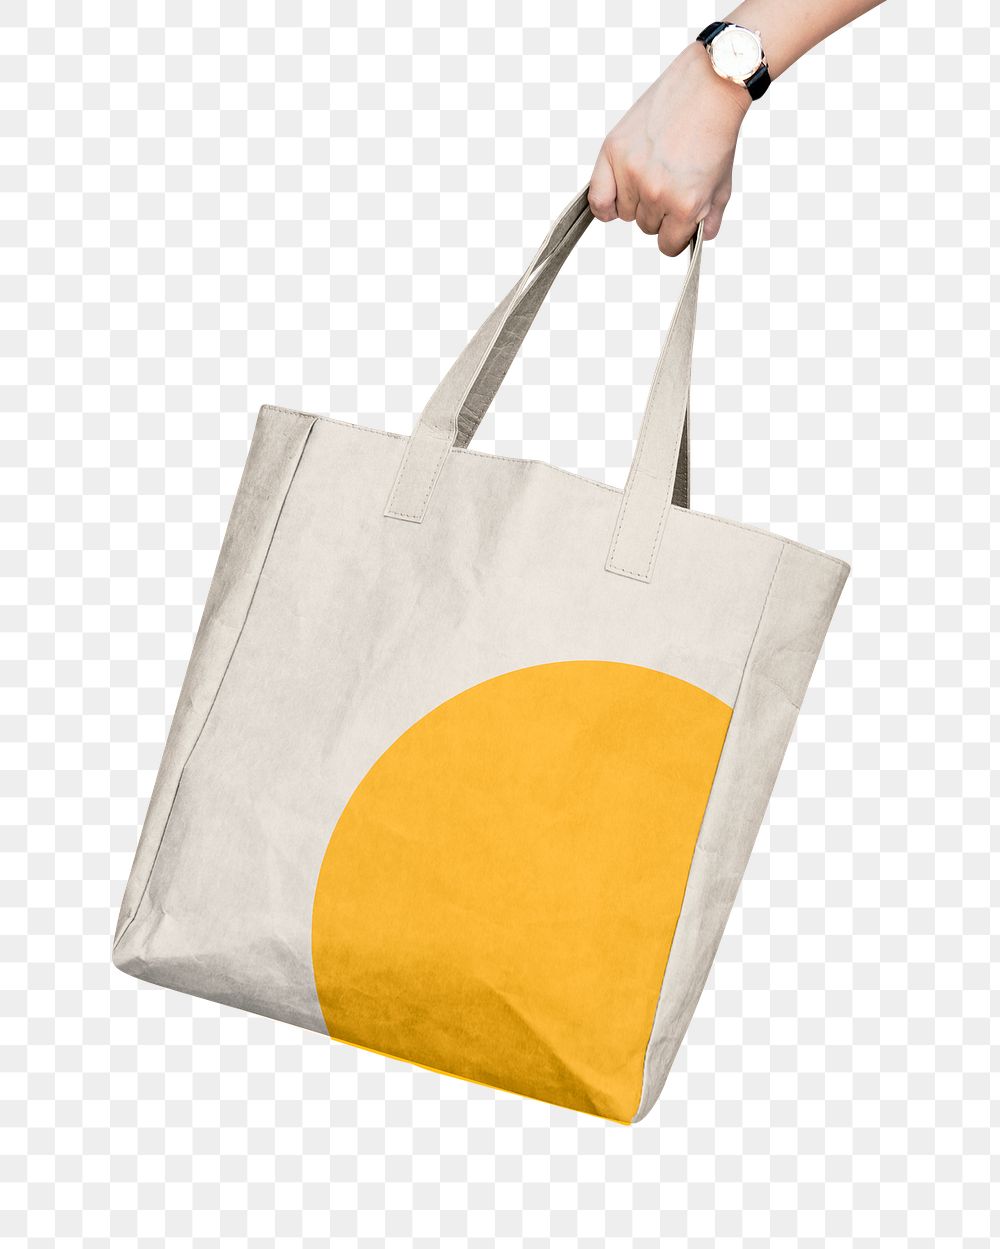 Tote bag png, eco-friendly fashion product on transparent background